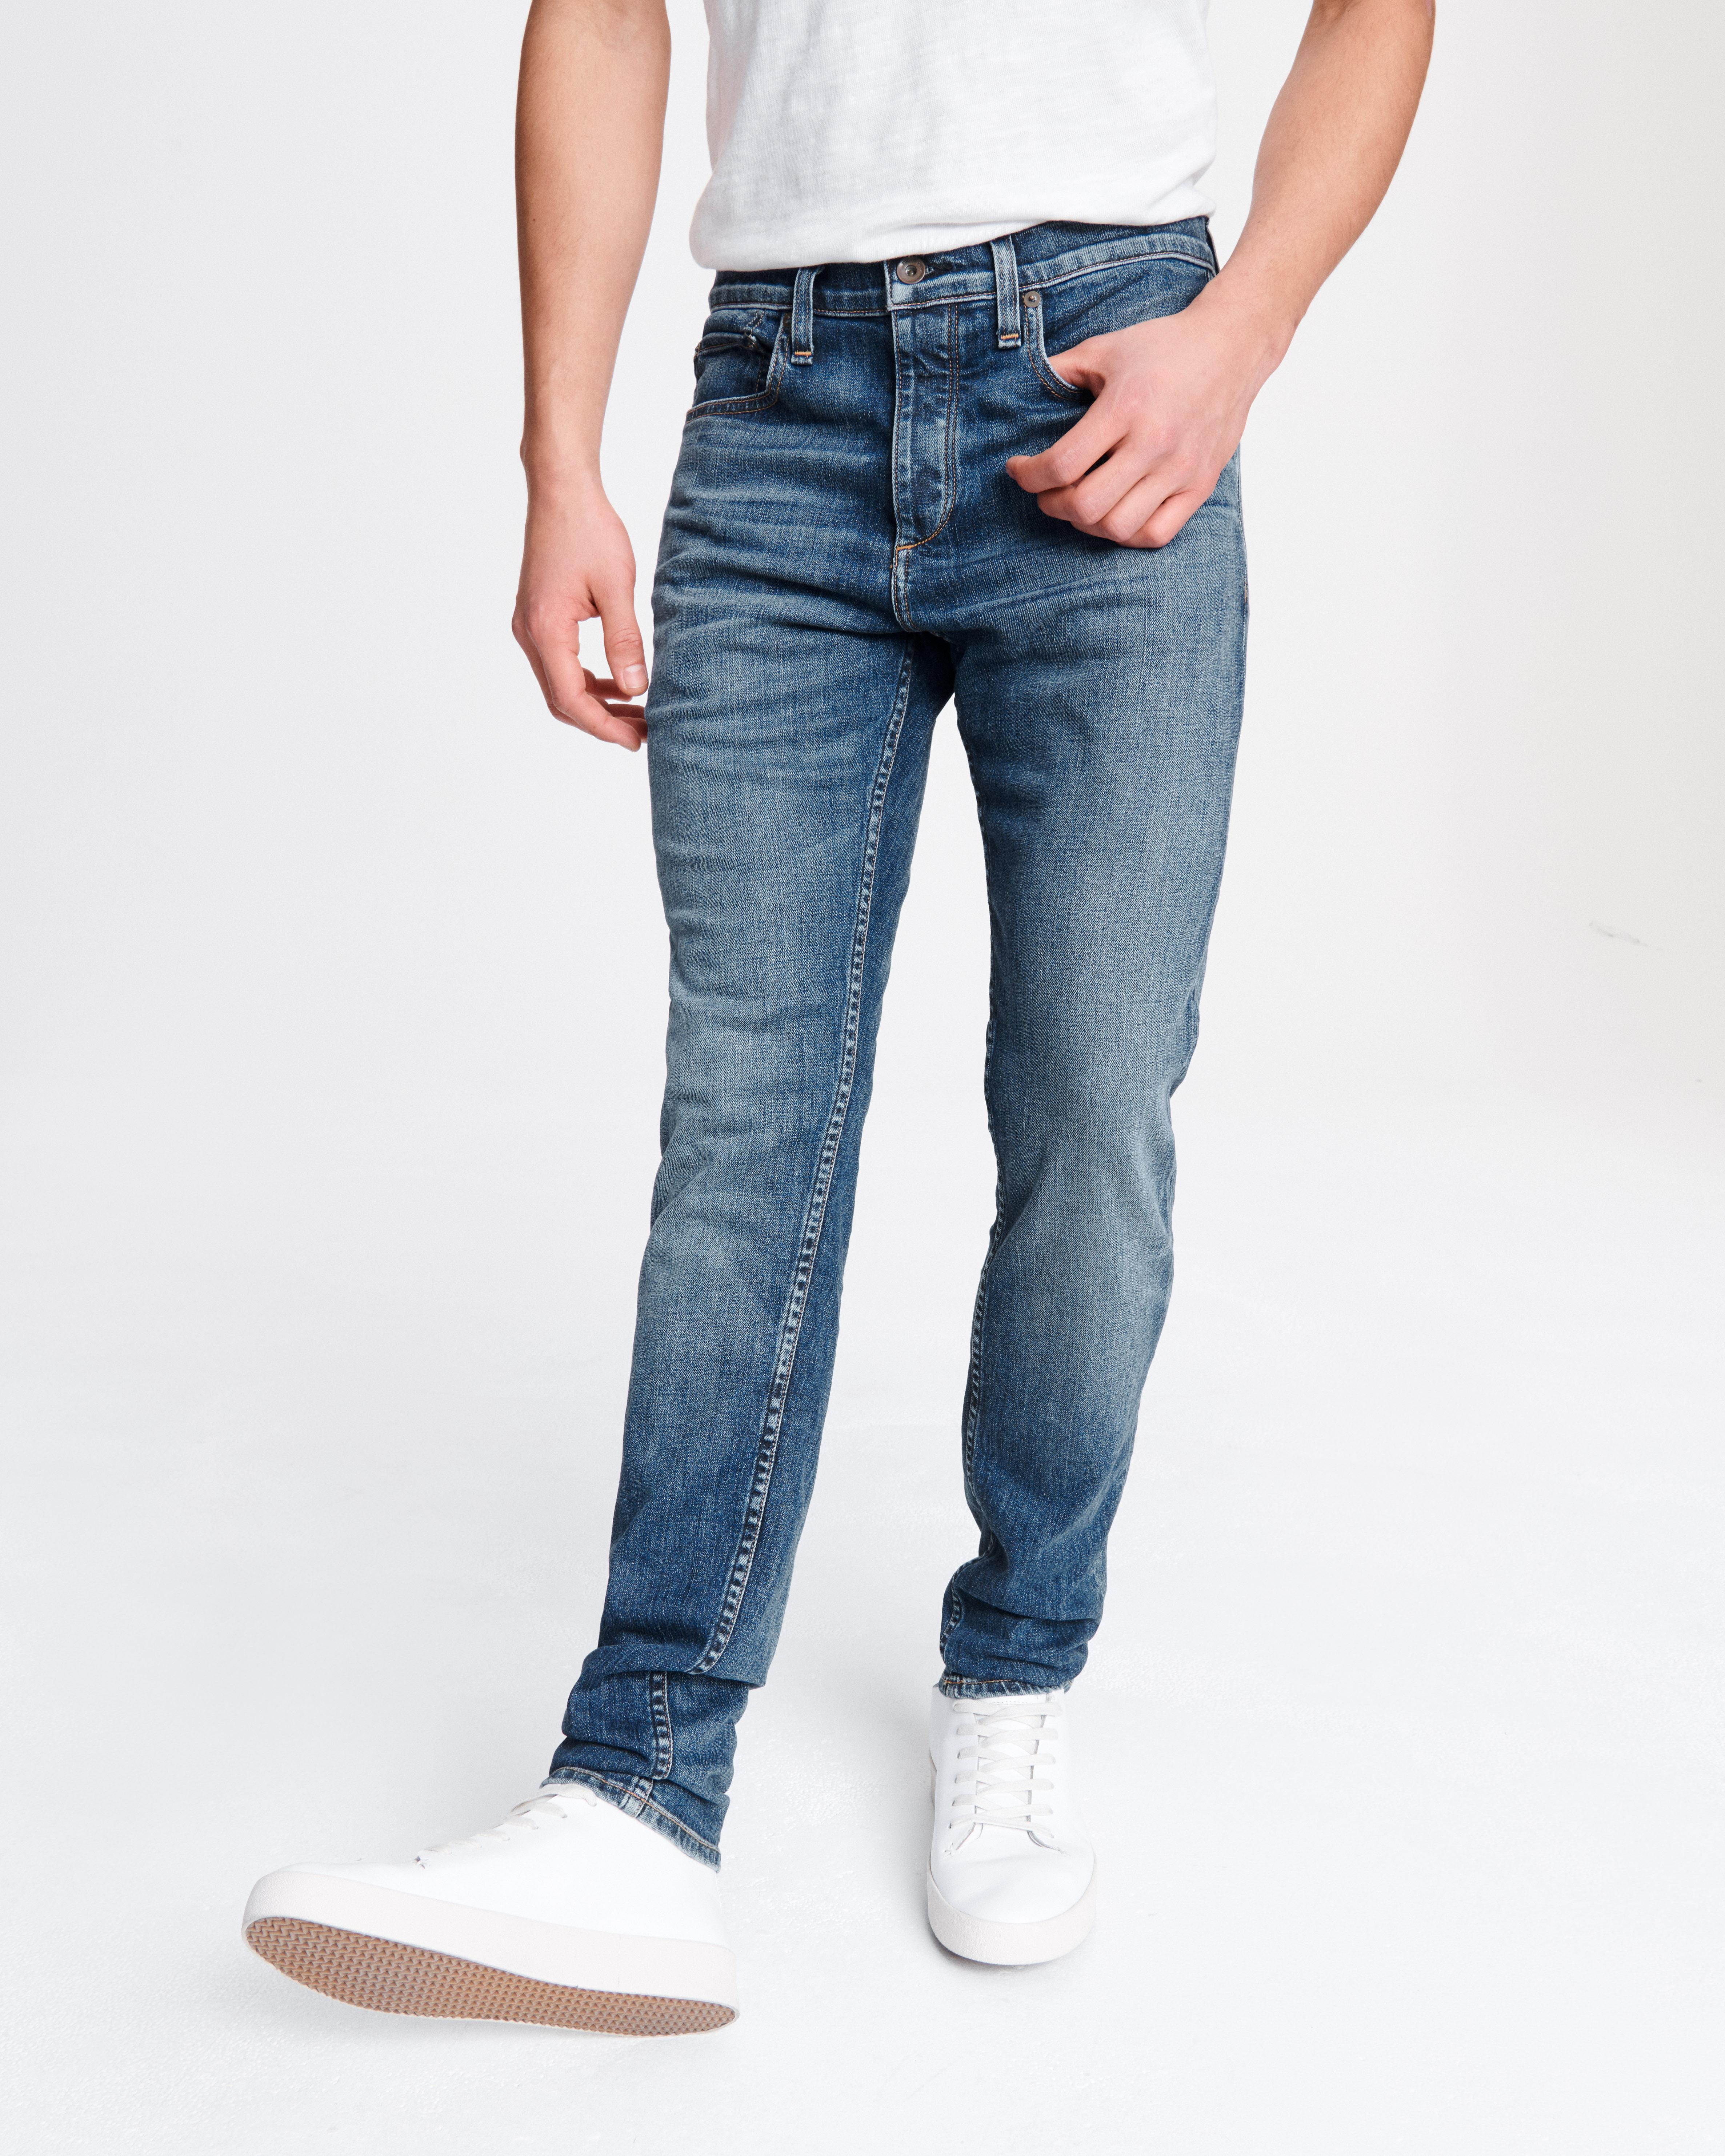 good quality jeans canada